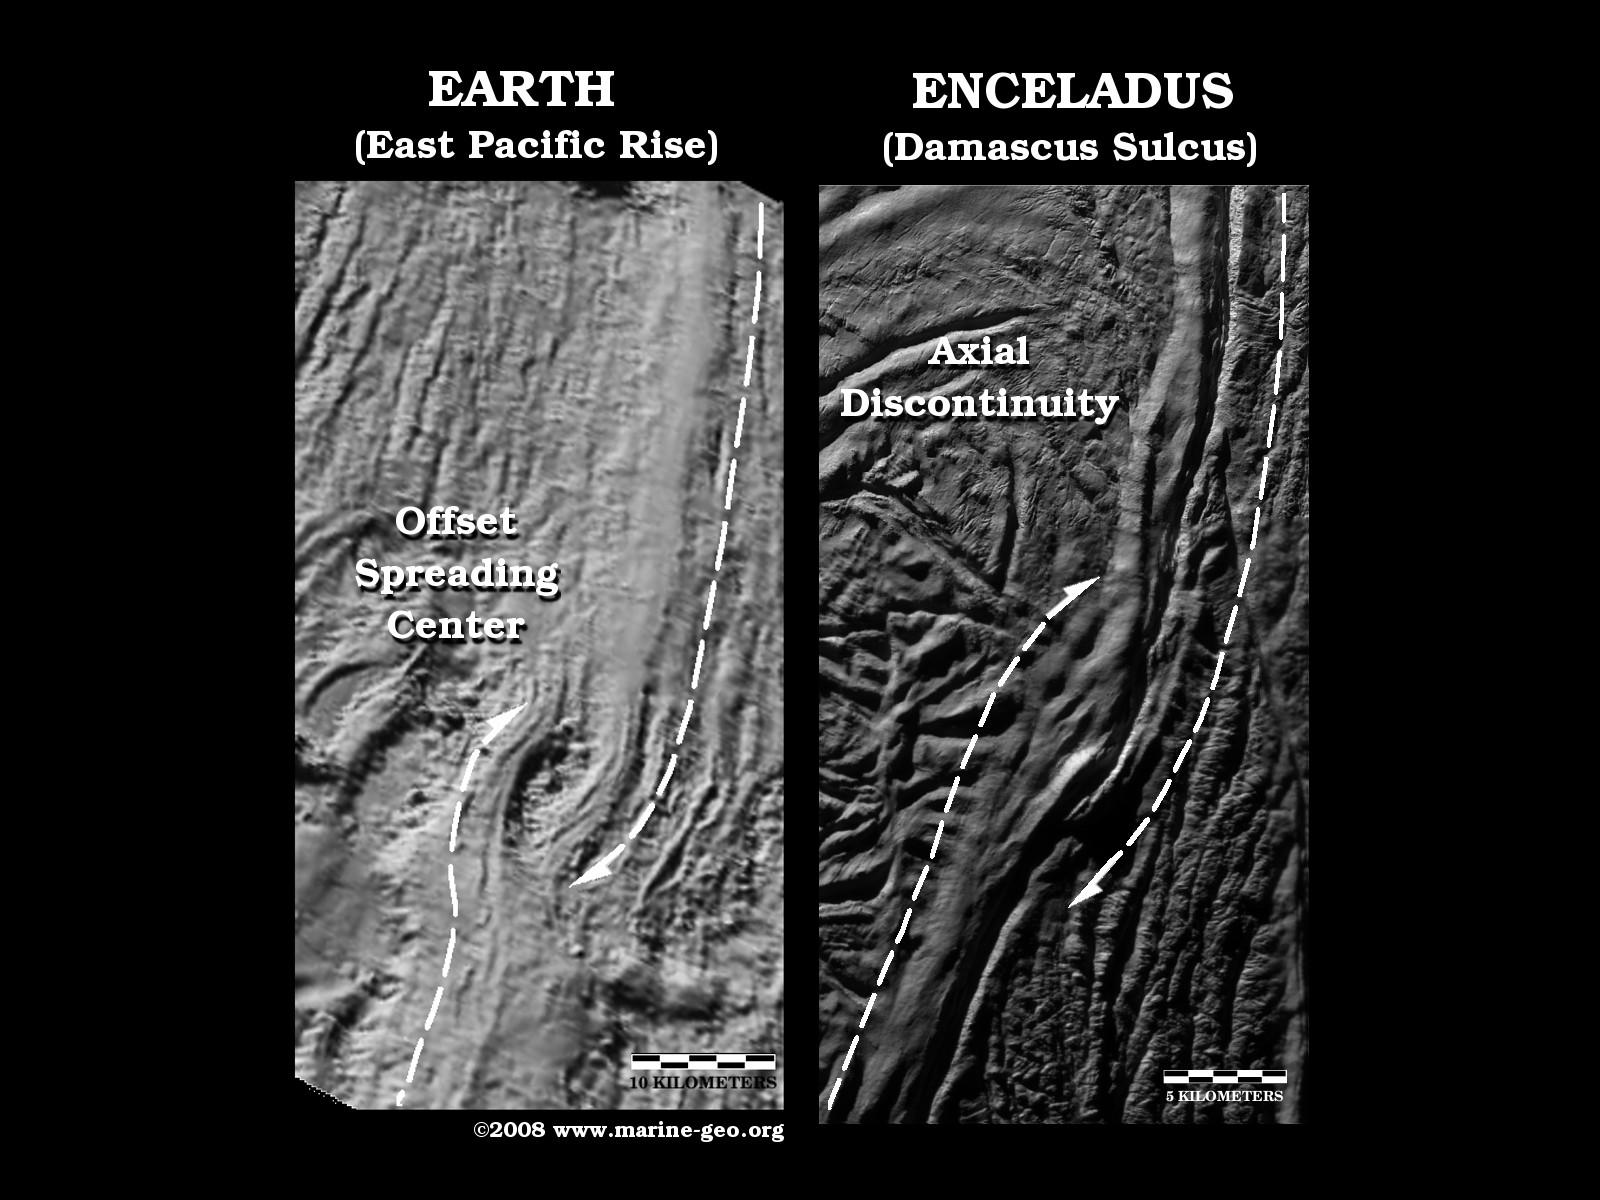 These two side-by-side images compare a "twisted" sea-floor spreading feature on Earth, known as an Offset Spreading Center (OSC), to a very similar looking twisted break, or axial discontinuity, in the Damascus Sulcus "tiger stripe" on Saturn’s moon Enceladus.